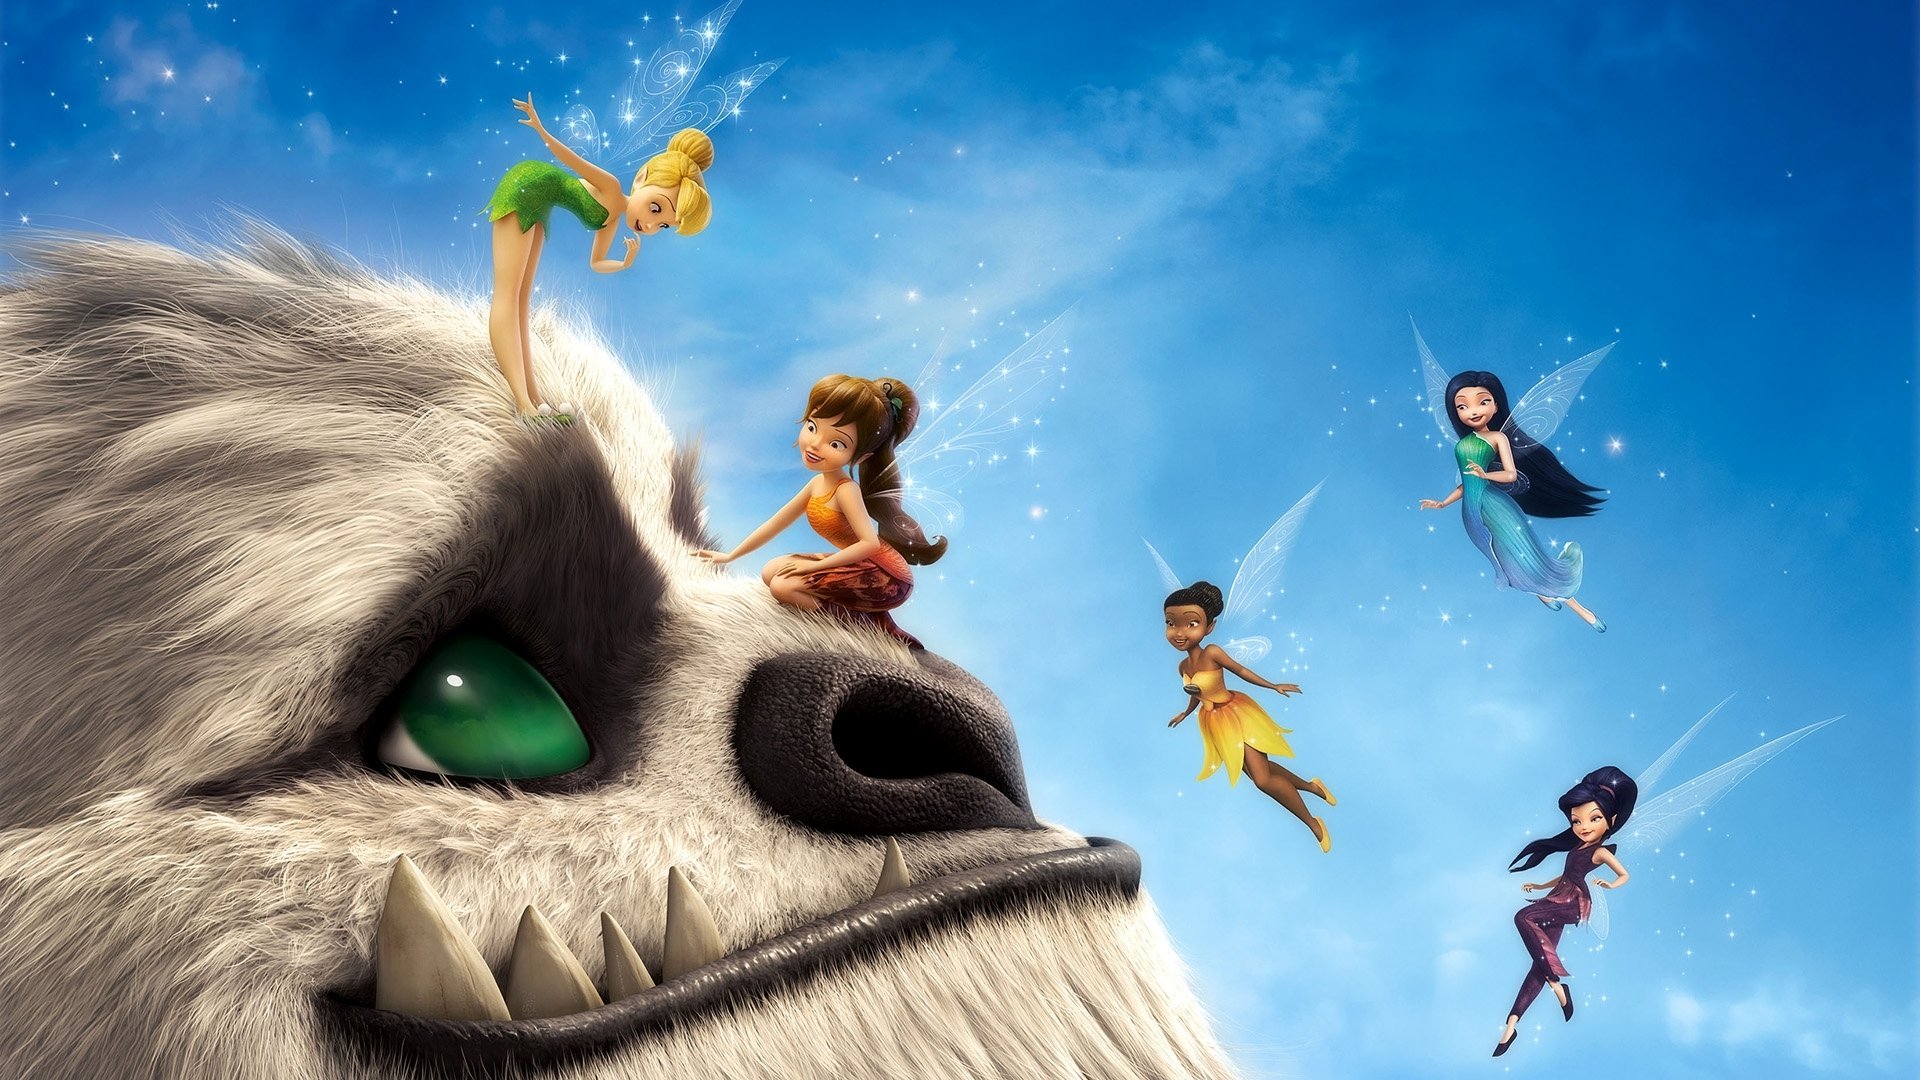 Tinker Bell And The Legend Of The Neverbeast Wallpapers